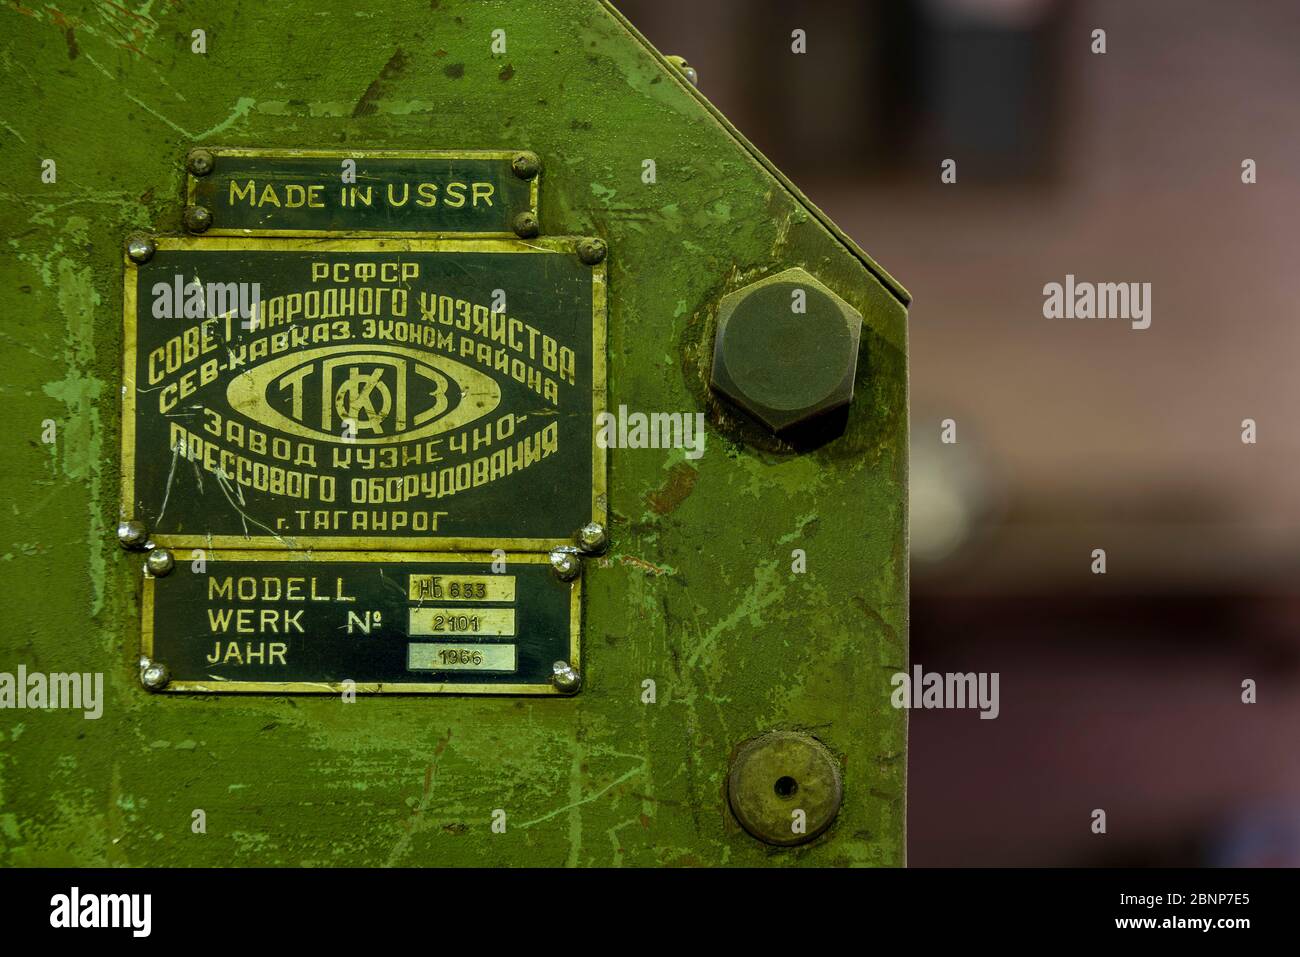 Nameplate on an old machine from the Soviet Union. Stock Photo